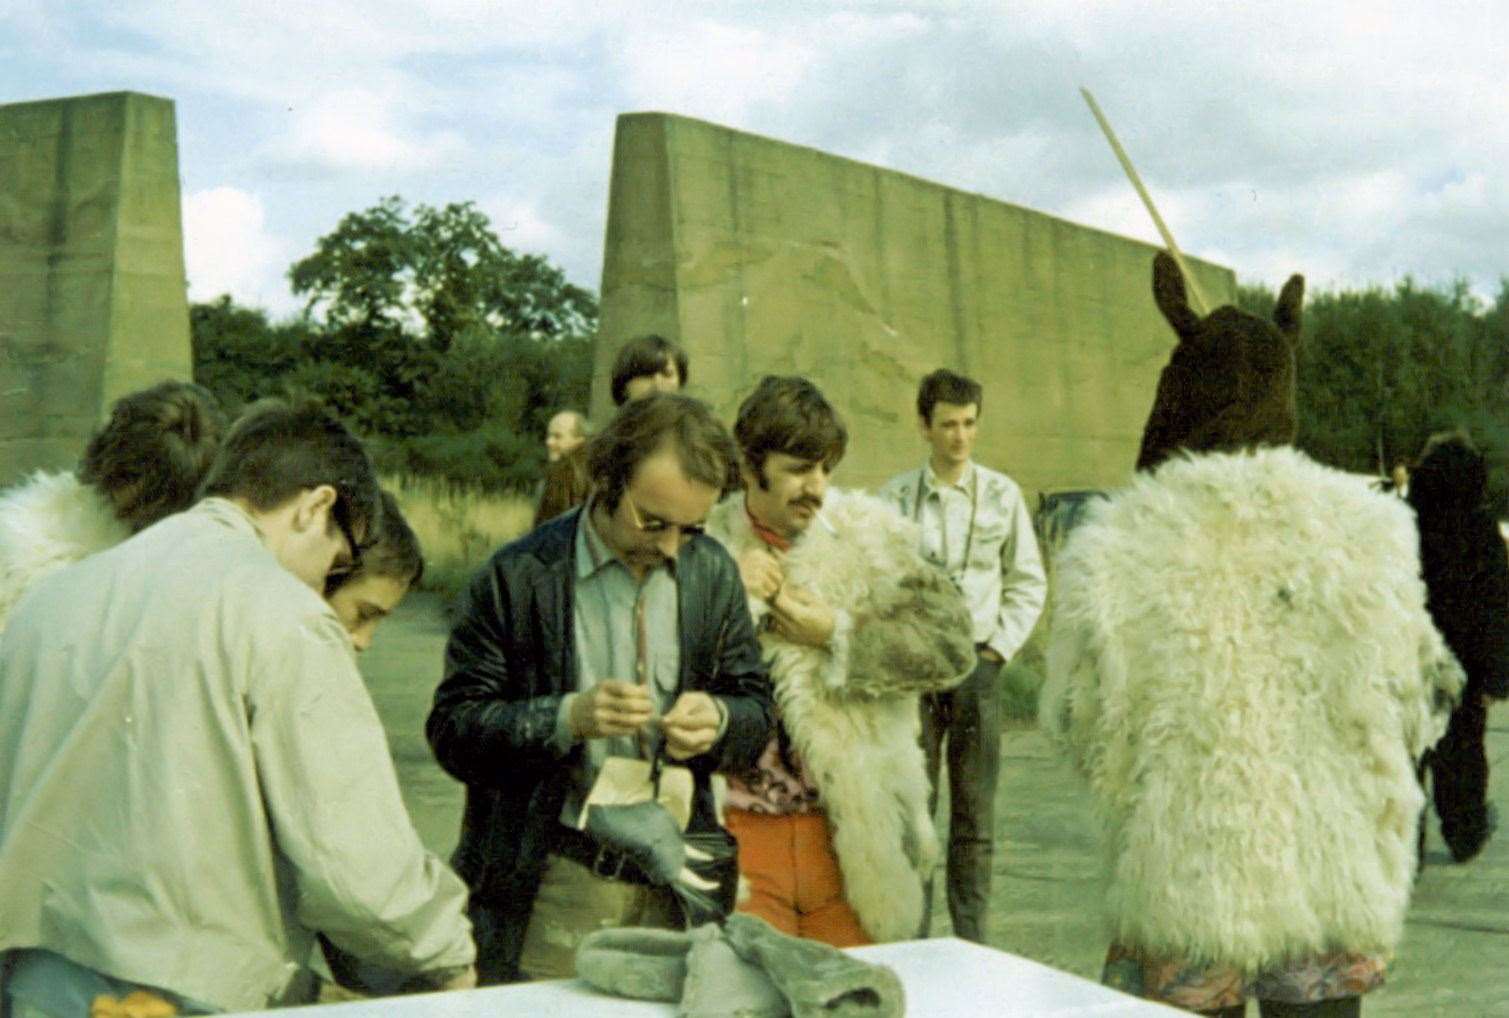 The Beatles' visit to West Malling in 1967. Submitted by Jason Cornthwaite